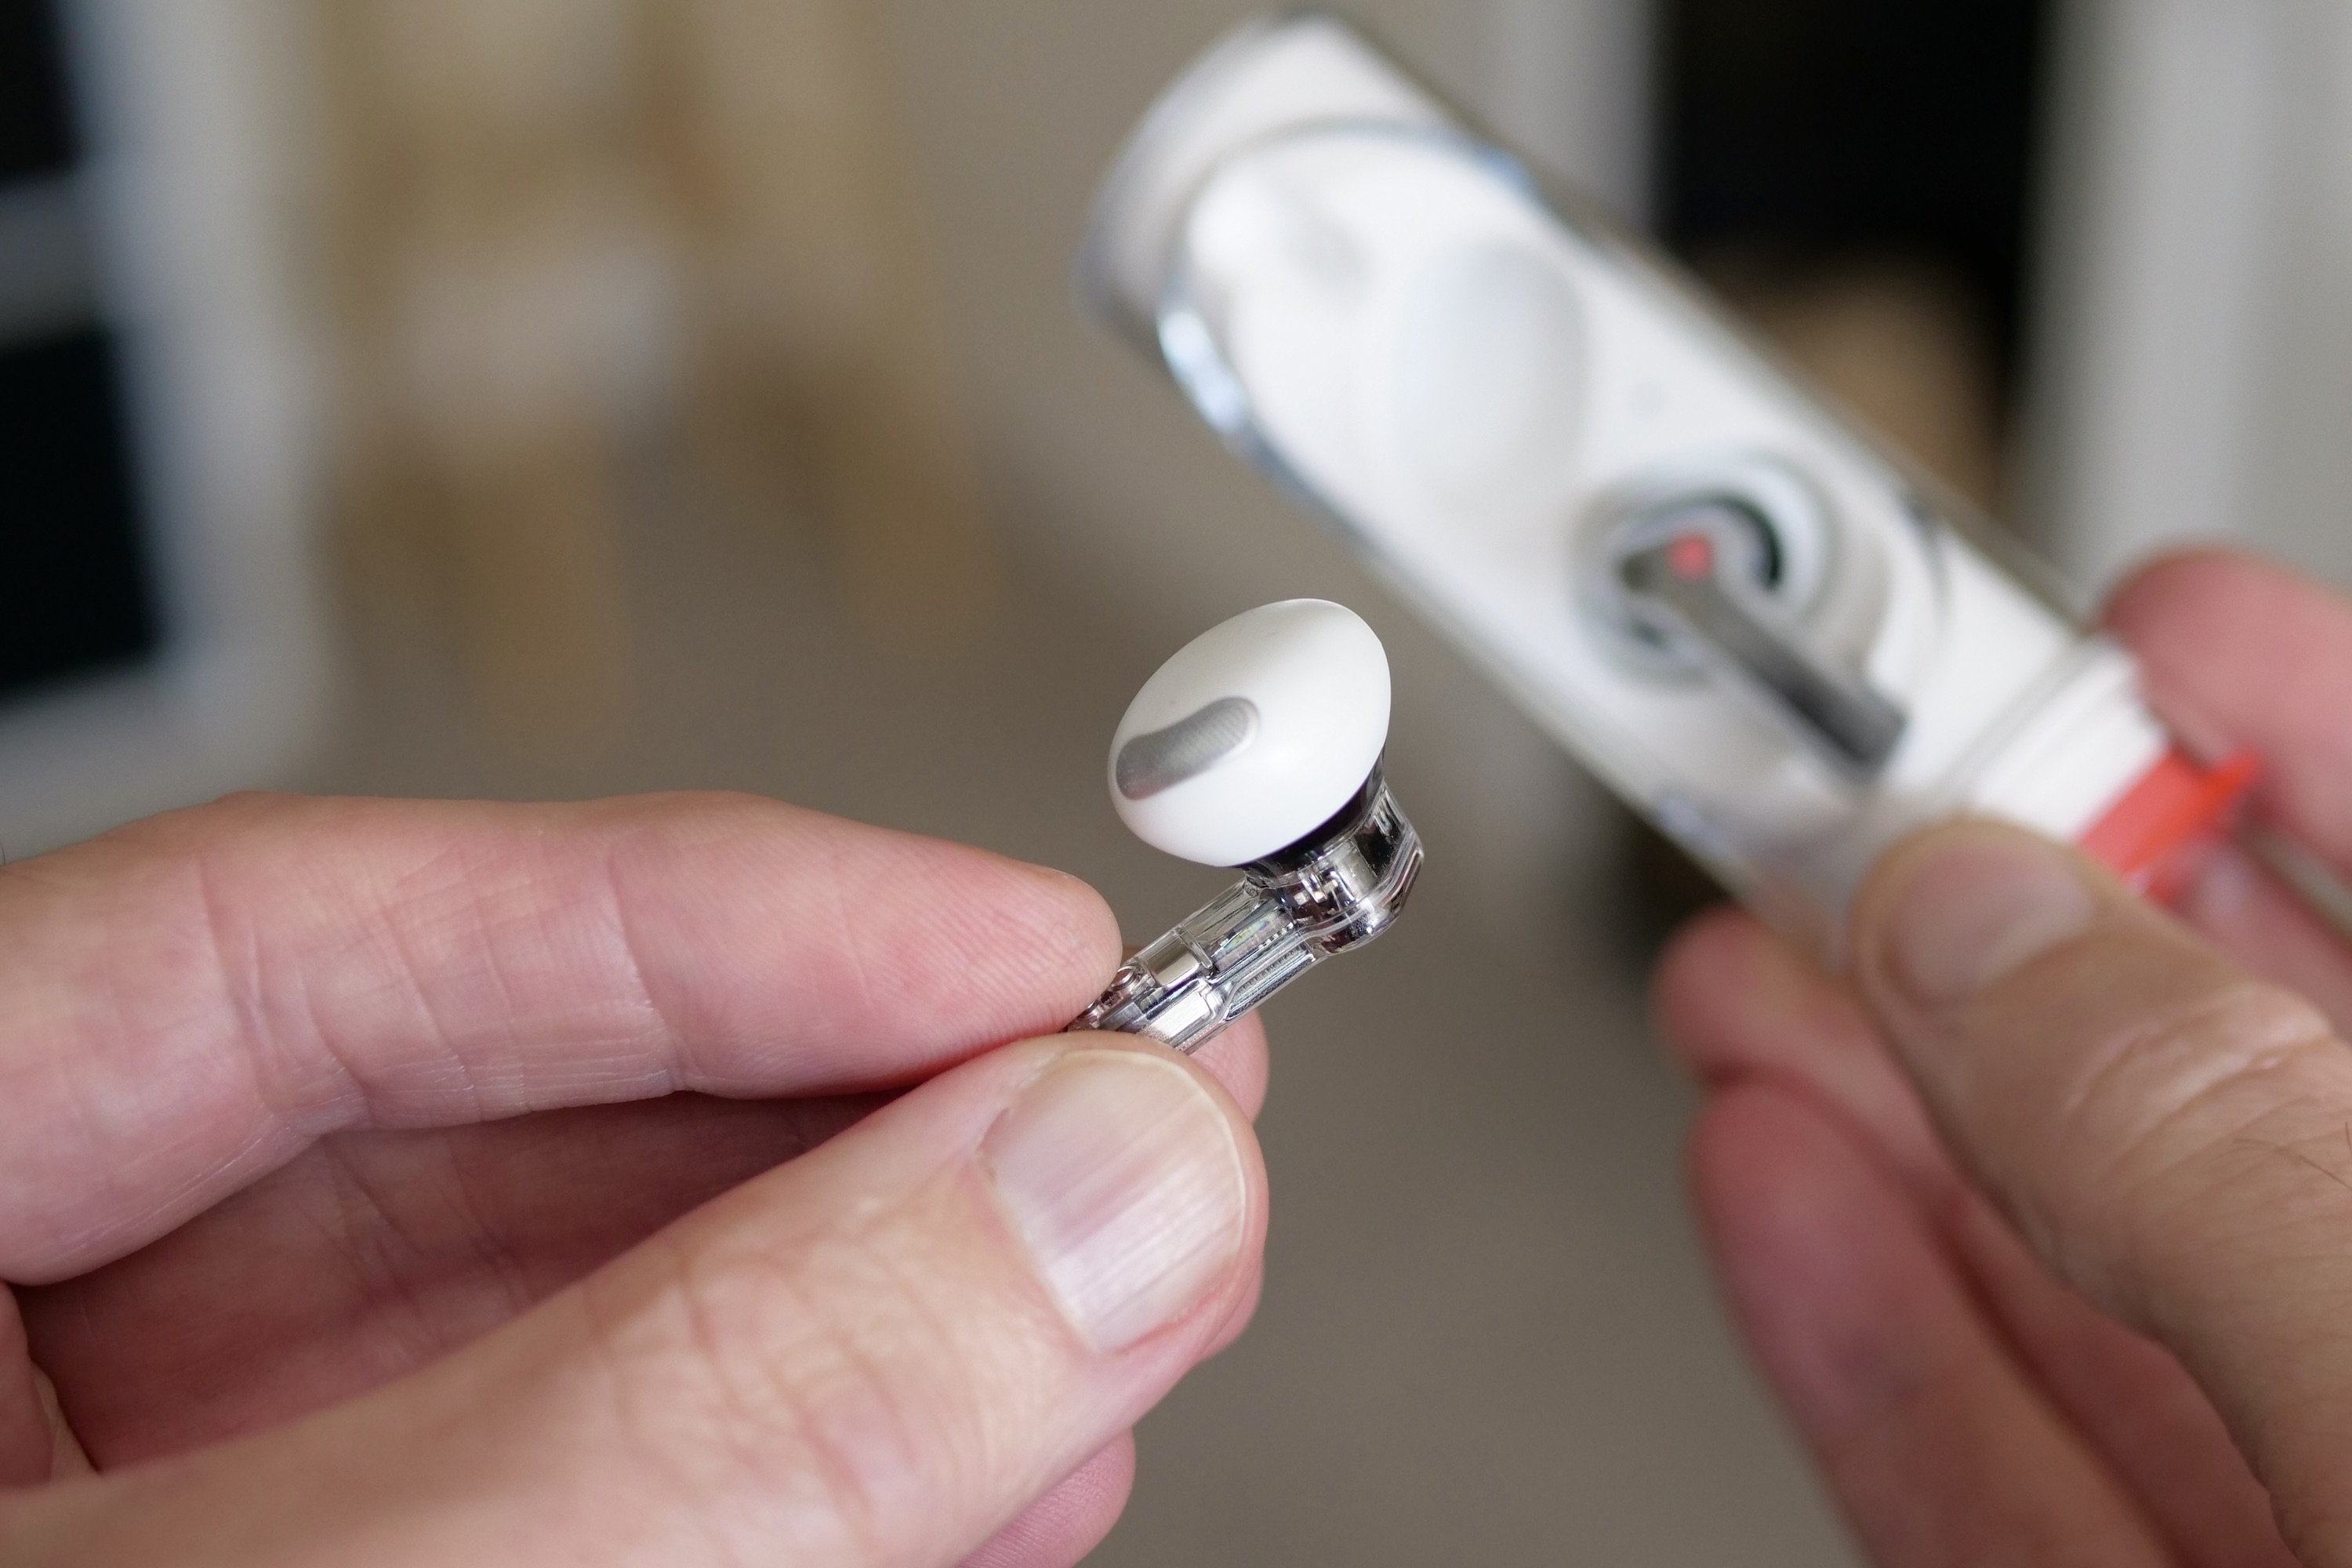 Nothing Ear Stick Review: Exciting Design, but the Fit Holds It Back